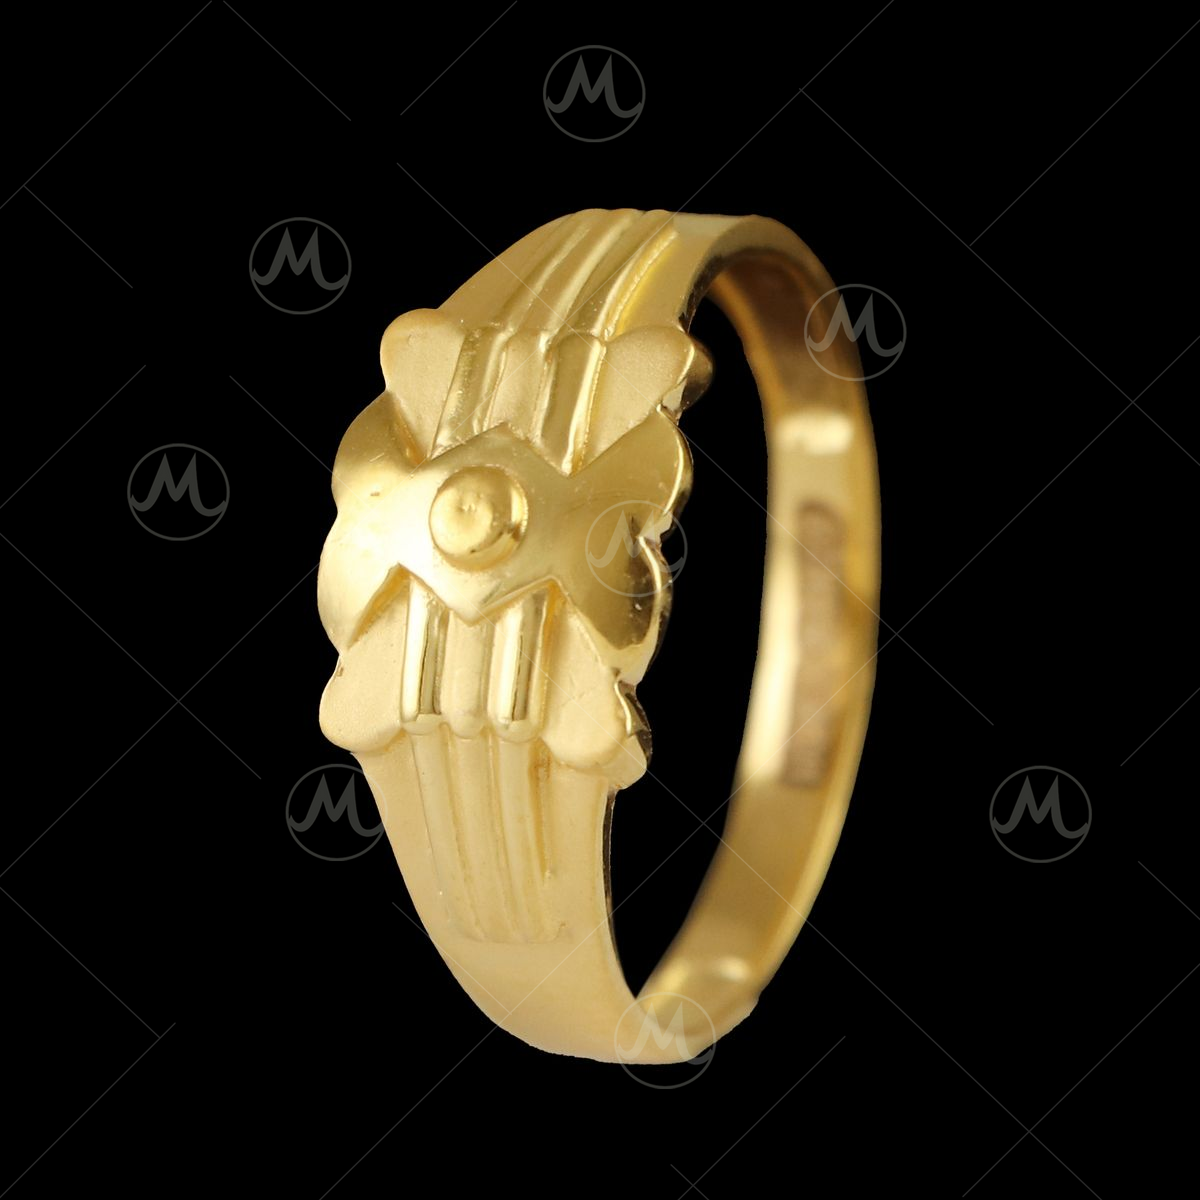 Buy quality 916 gold casting flower design Gents ring in Ahmedabad